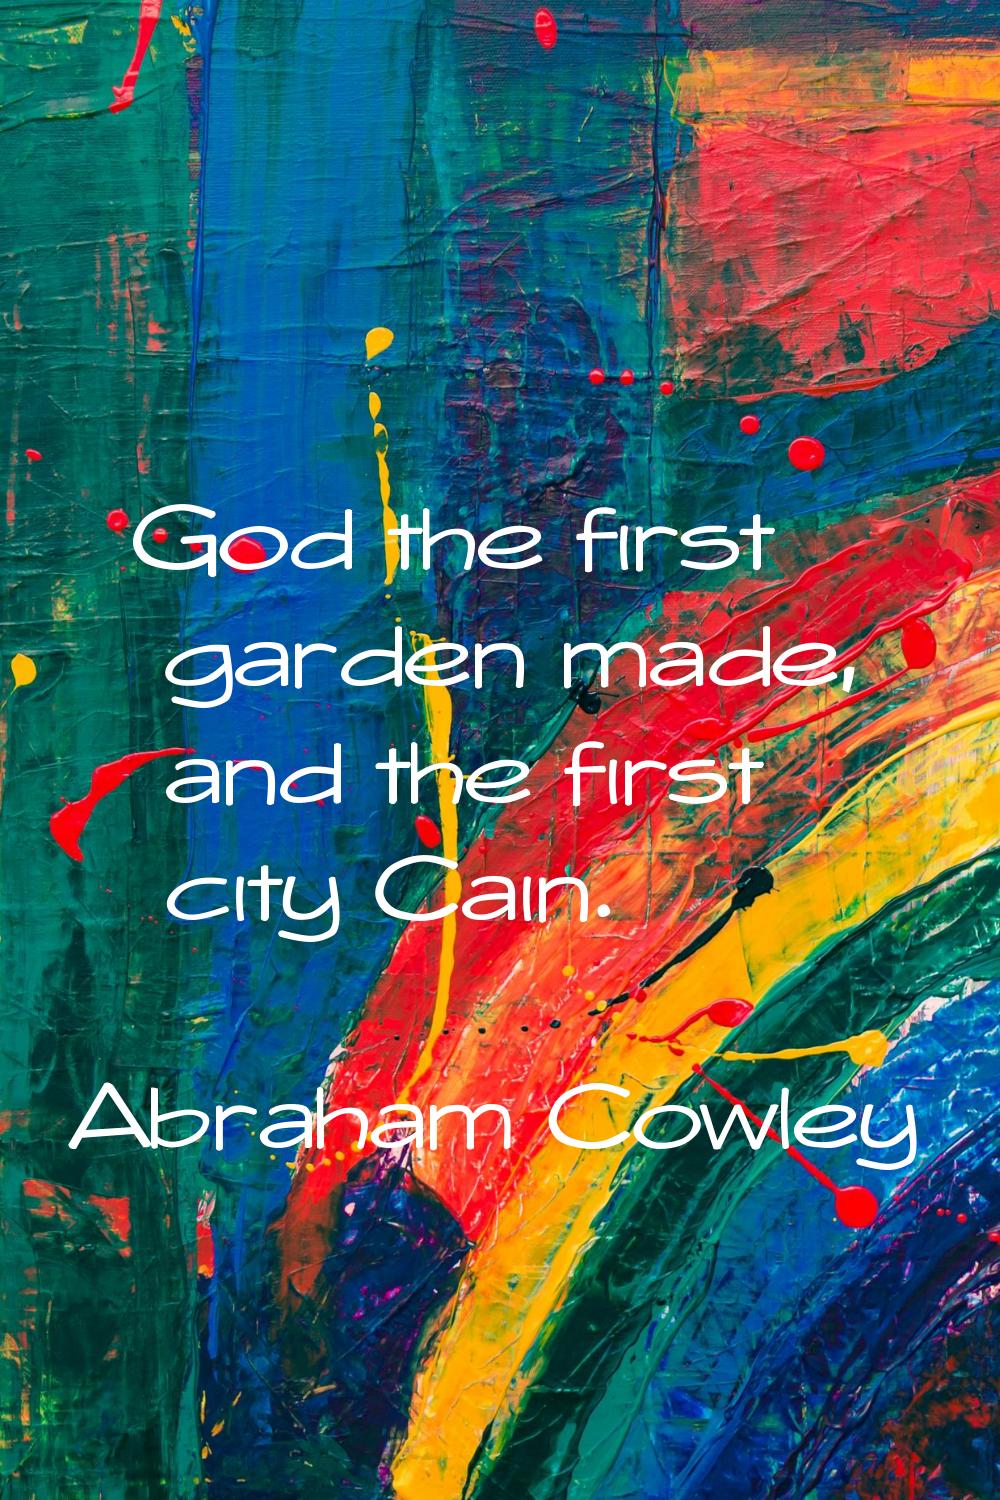 God the first garden made, and the first city Cain.